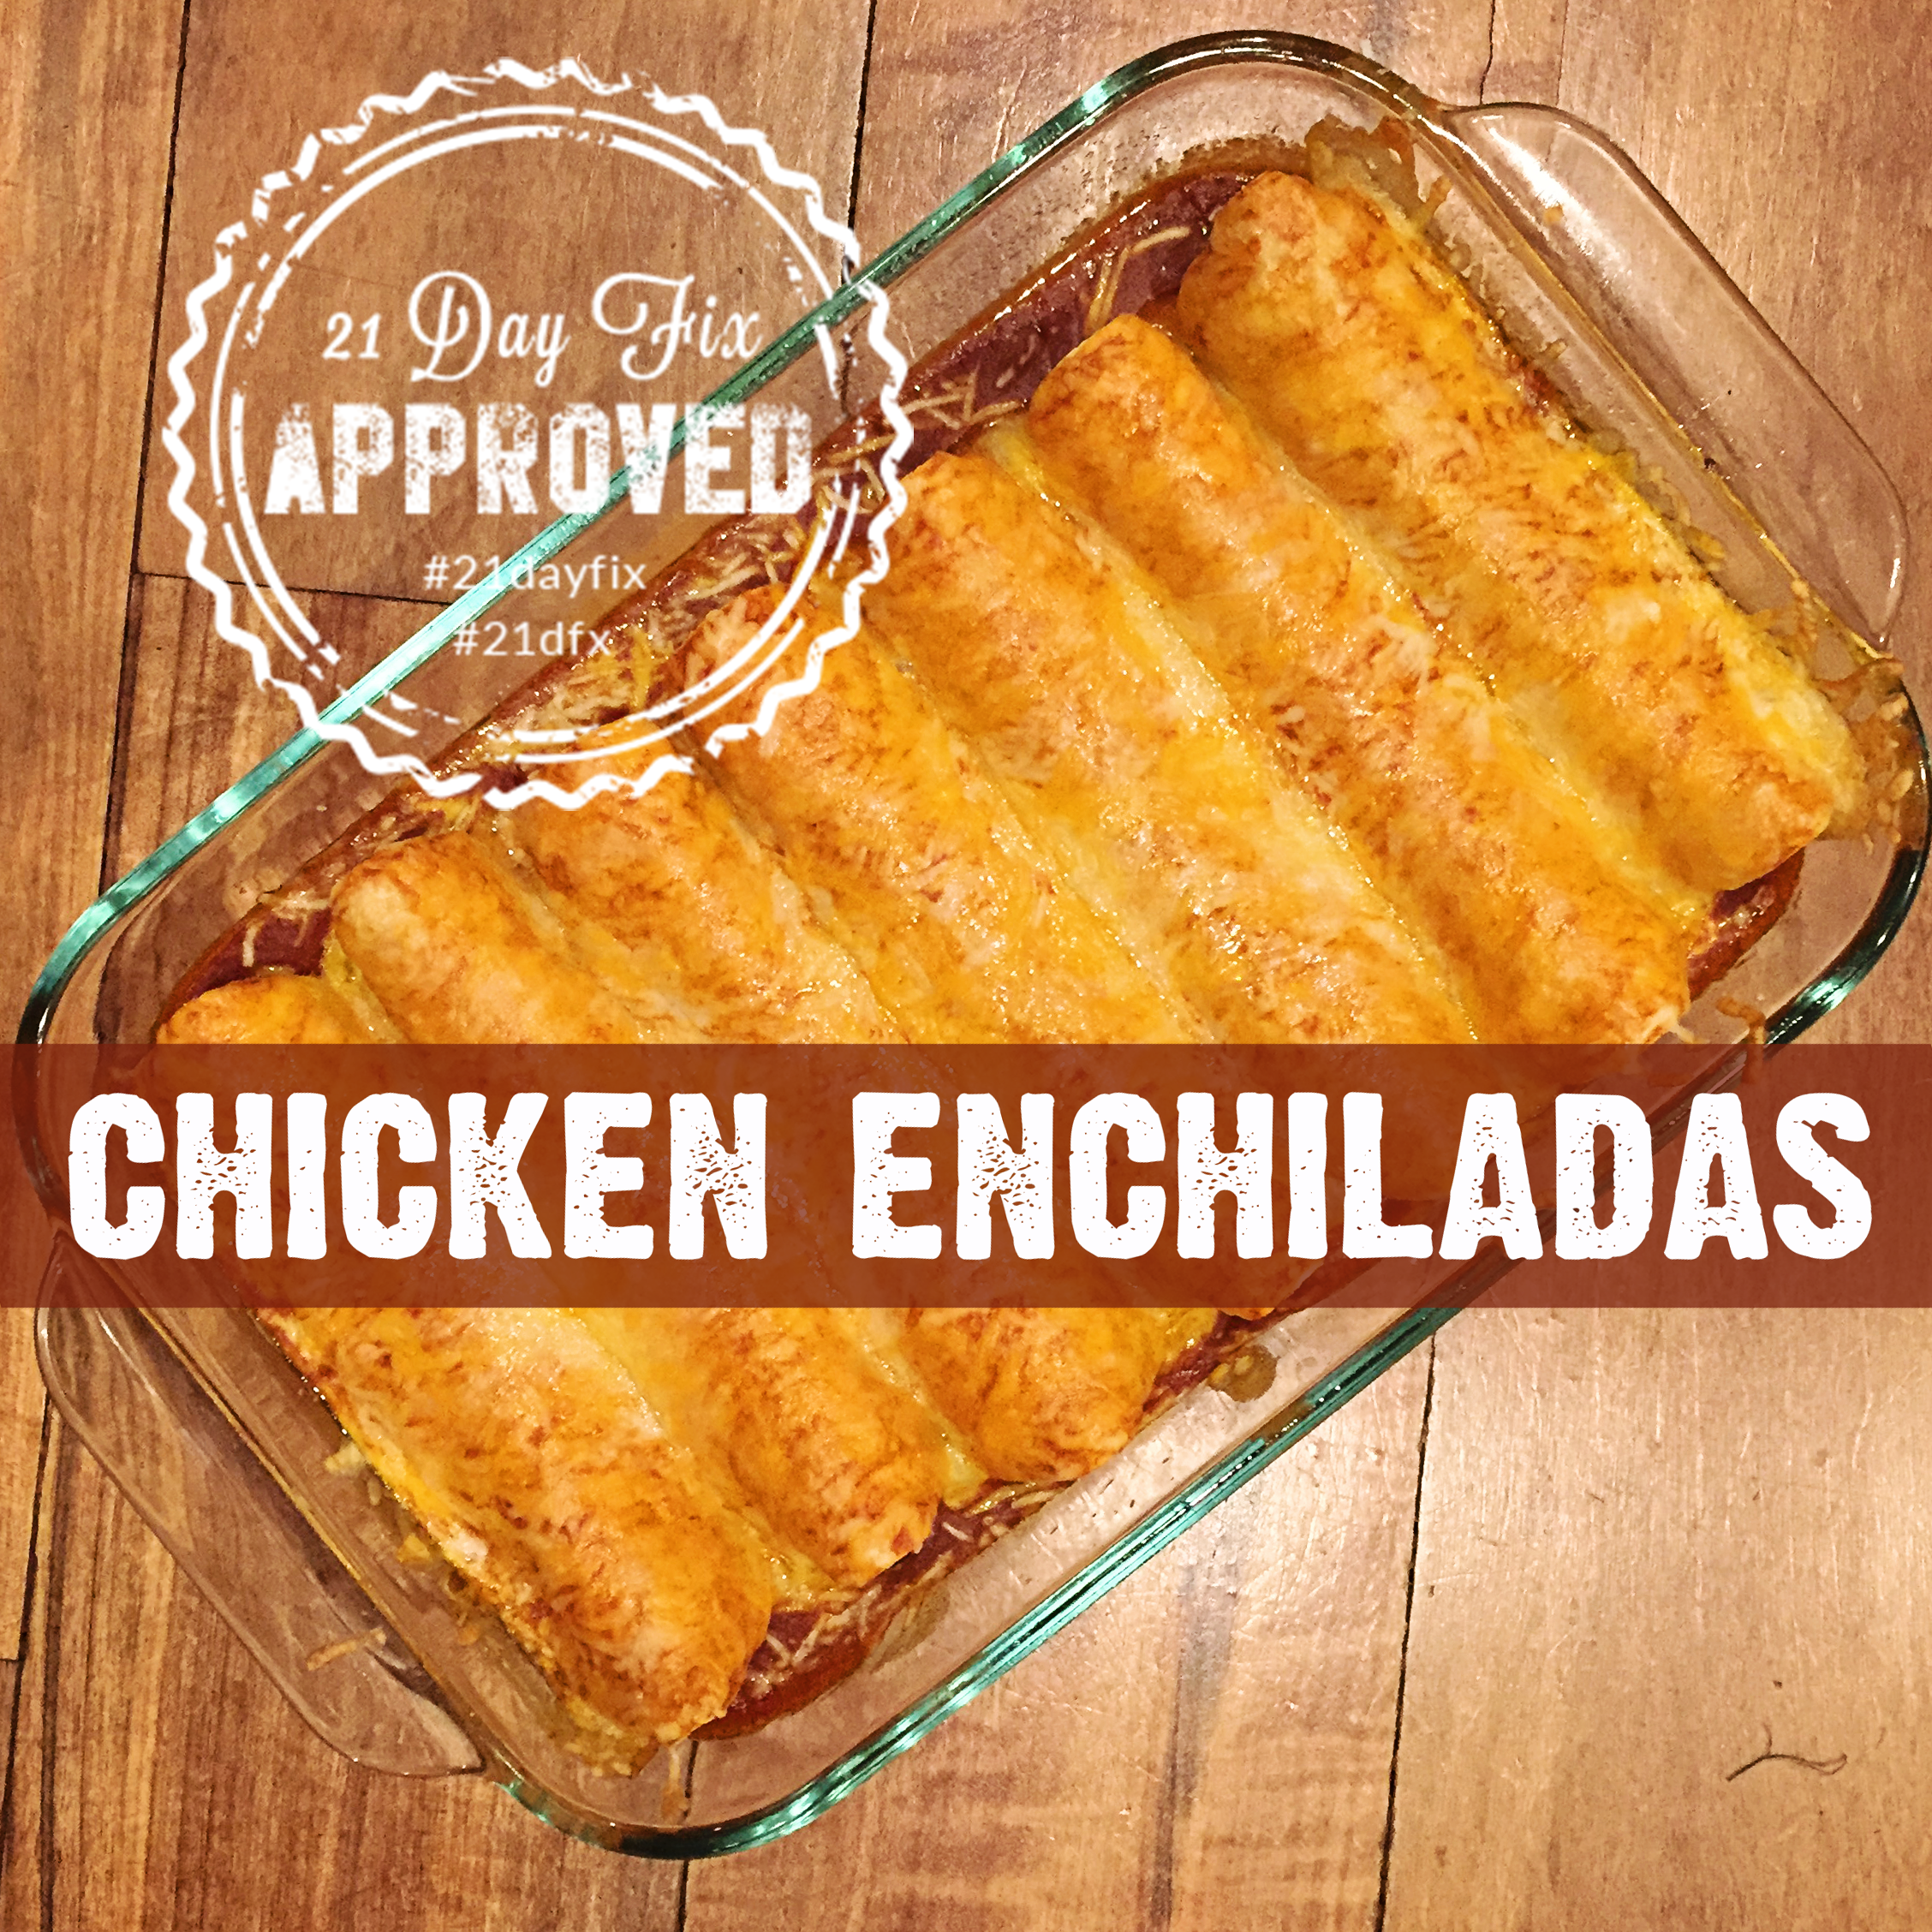 These 21 Day Fix approved chicken enchiladas are simple and delicious! Mexican is my downfall and I looooove enchiladas. I have made tons of chicken enchilada recipes over the years but, recently, I went looking for one that was simple, 21 day fix approved, and tasted great. This is what I came up with and … … Continue reading ? -   23 mexican recipes enchiladas
 ideas